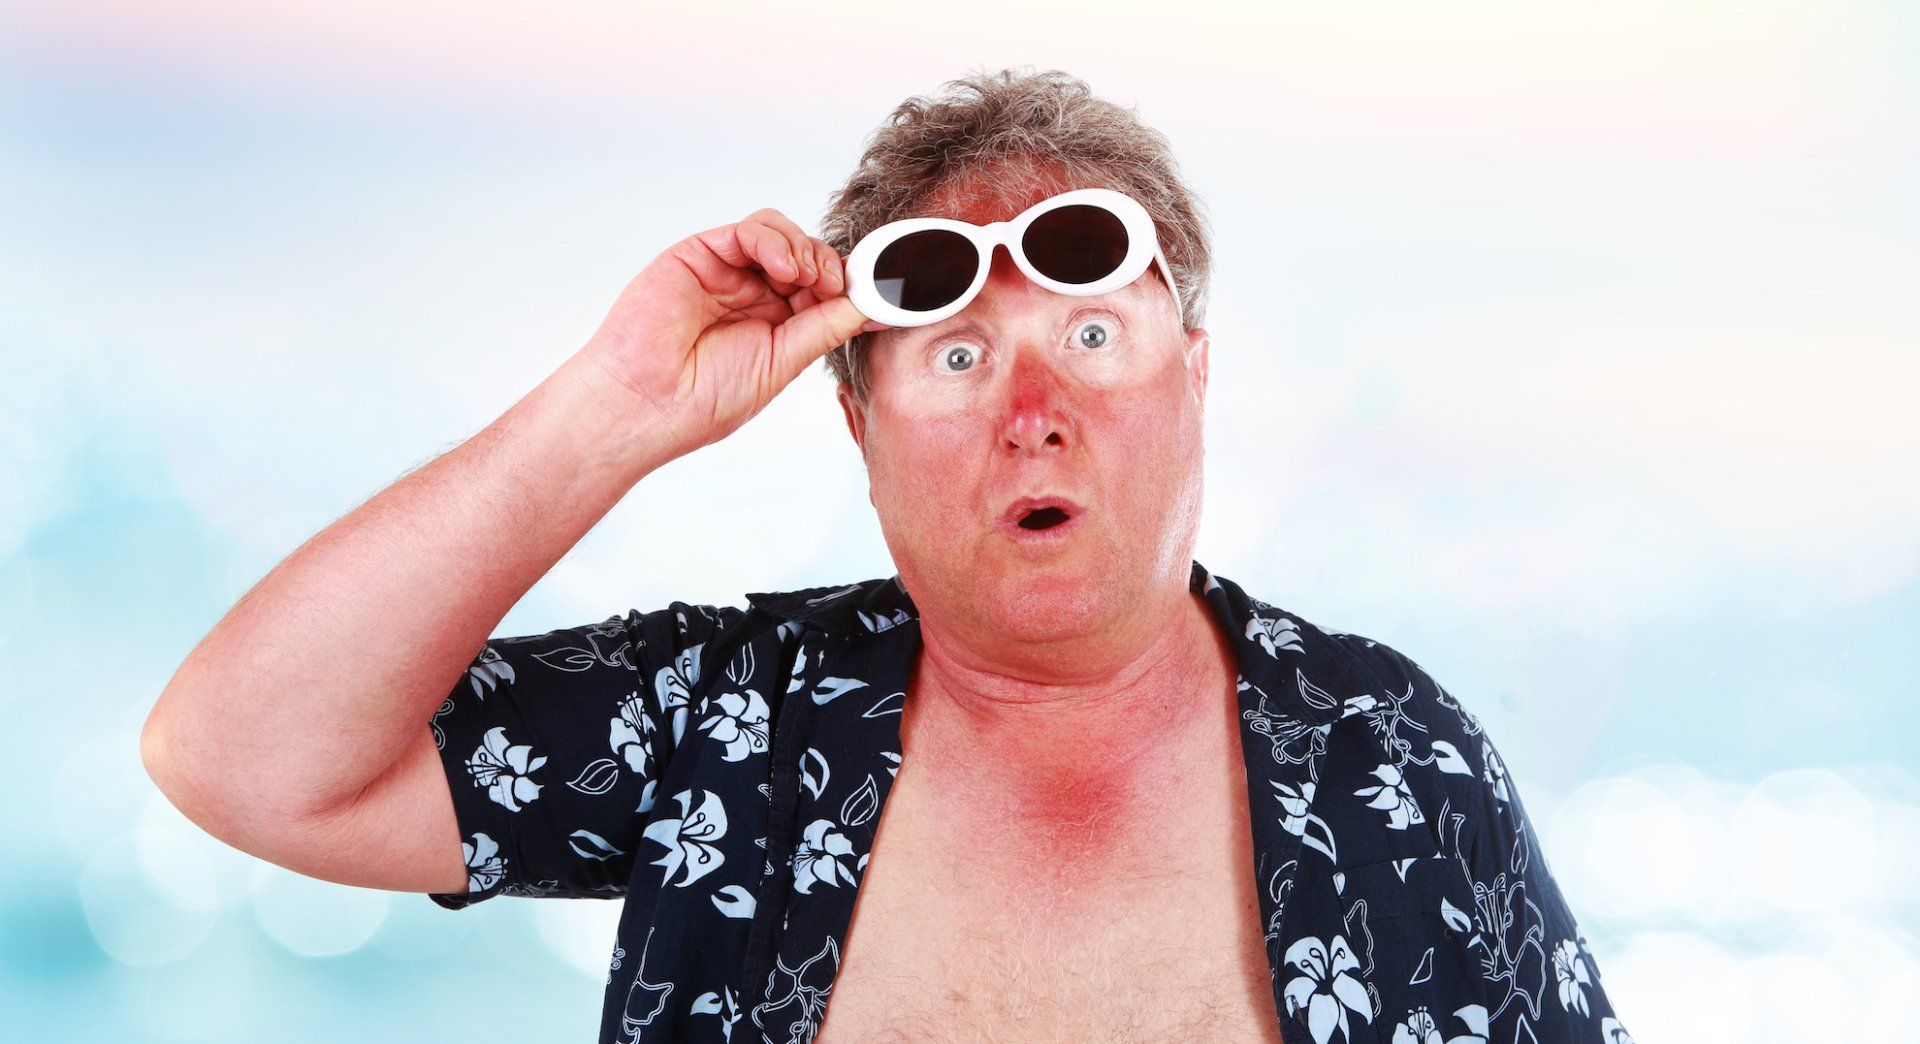 A shirtless man wearing sunglasses is making a surprised face